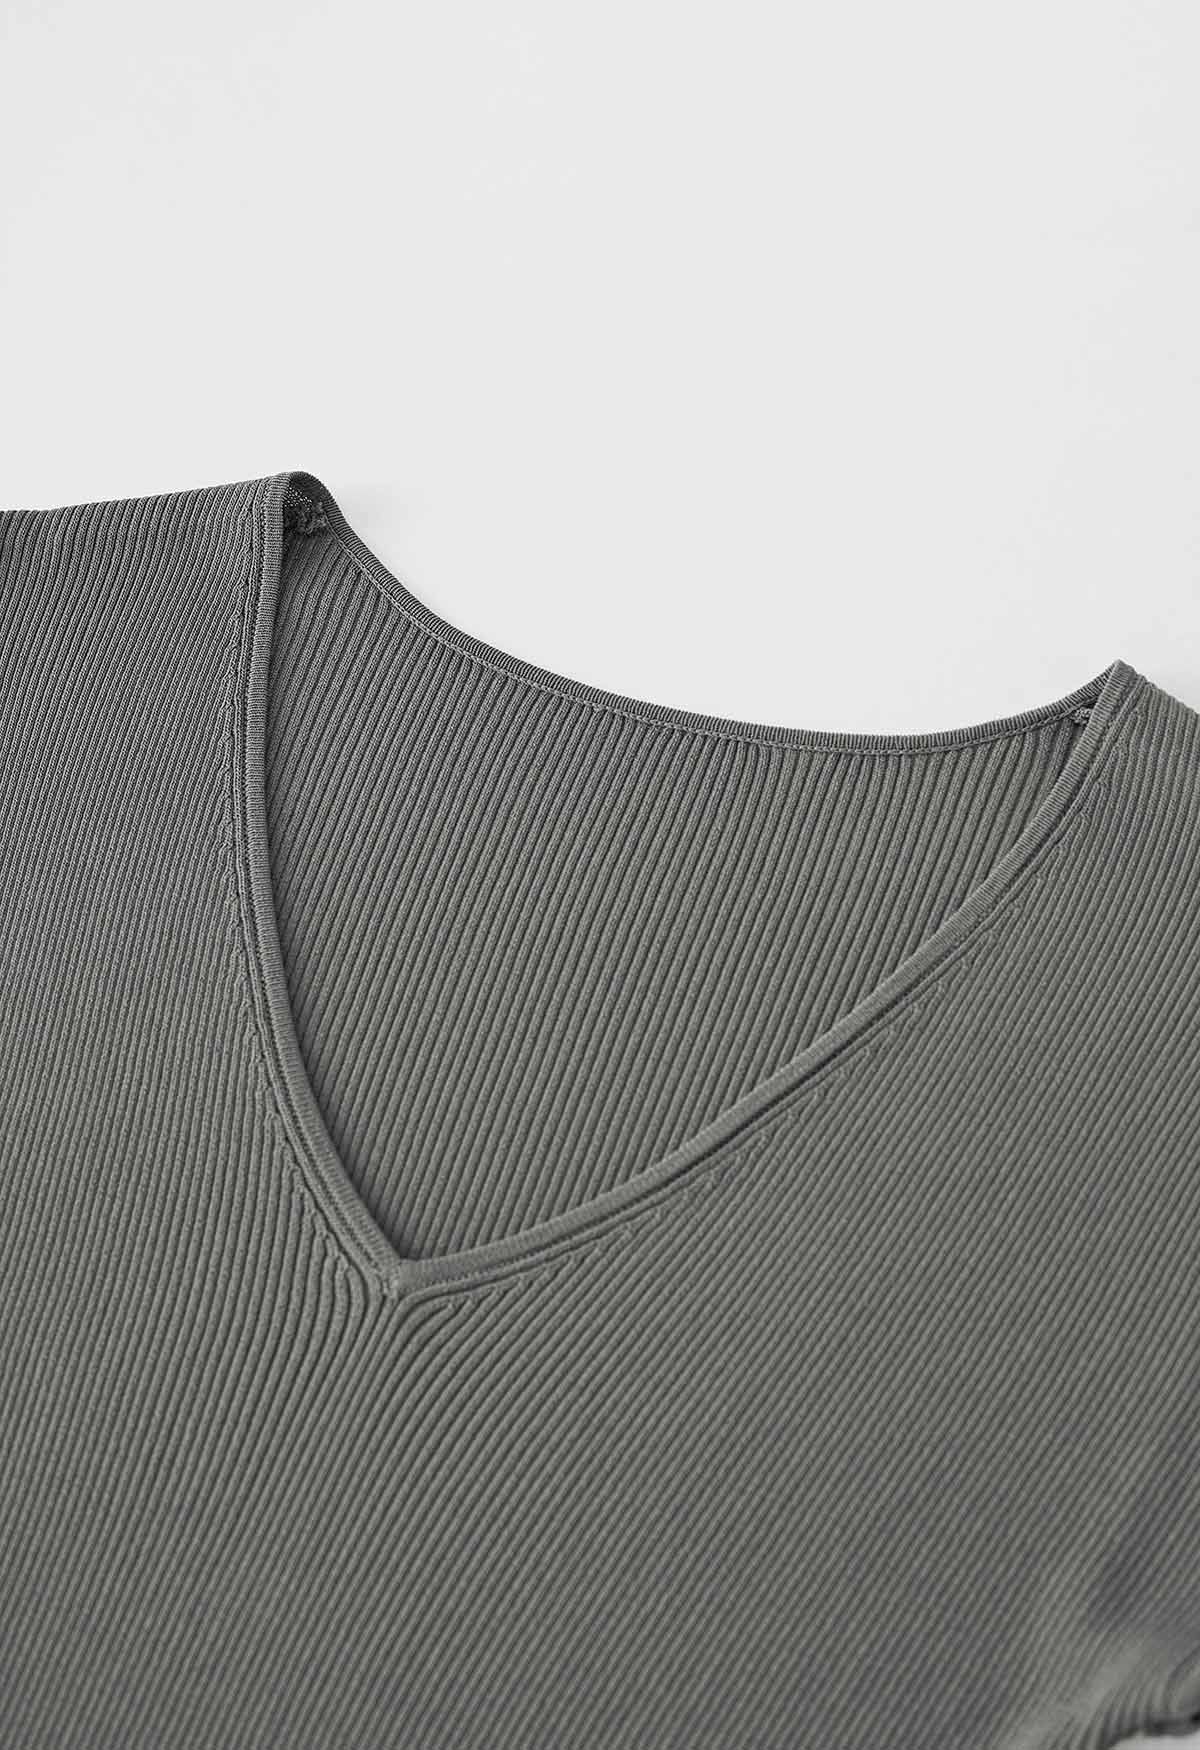 V-Neck Fitted Rib Knit Top in Smoke